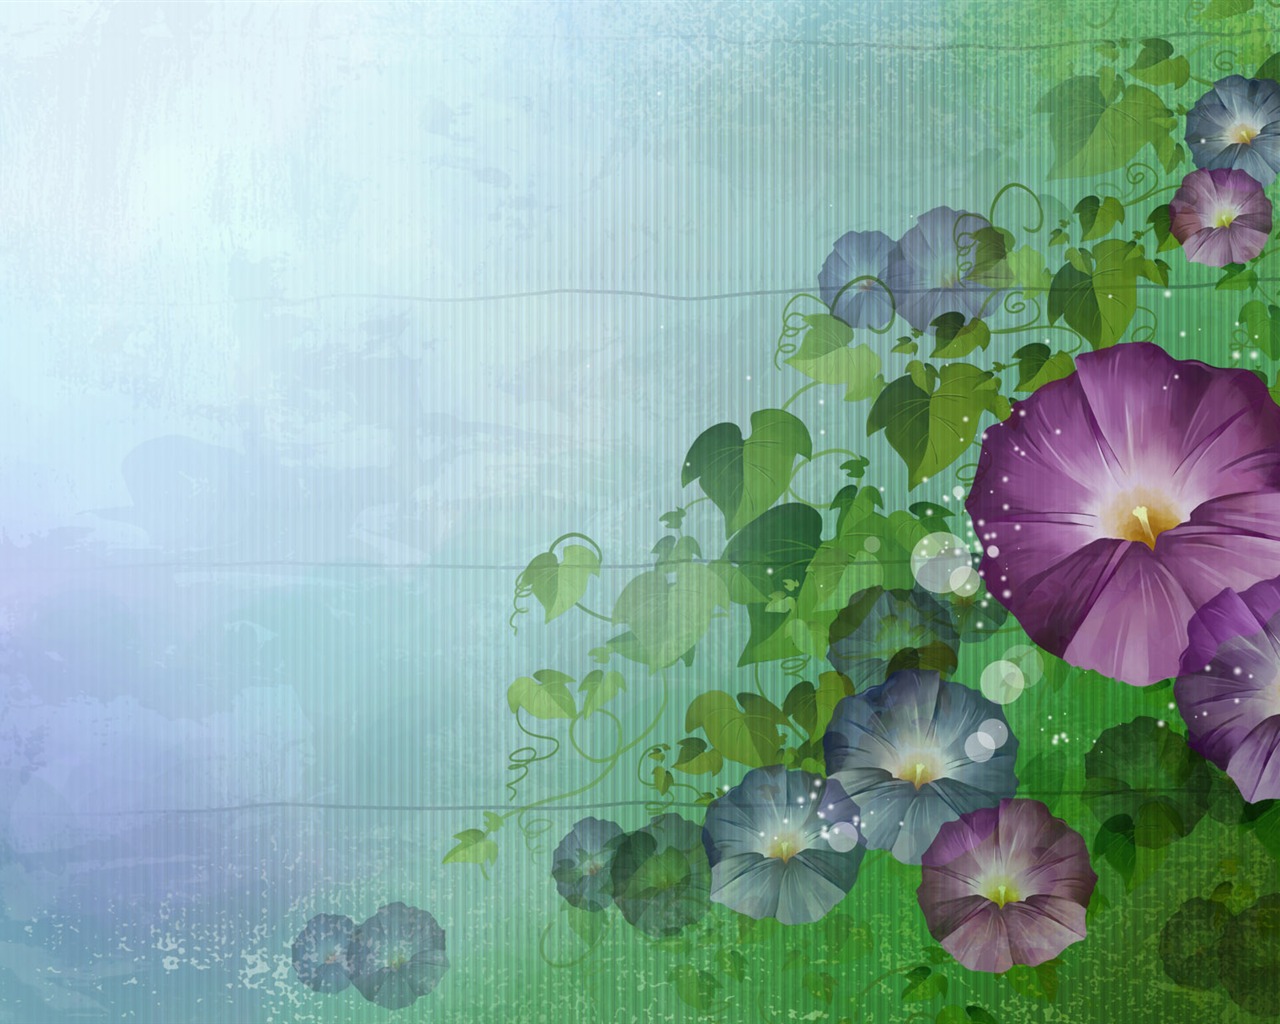 Synthetic Wallpaper Colorful Flower #21 - 1280x1024